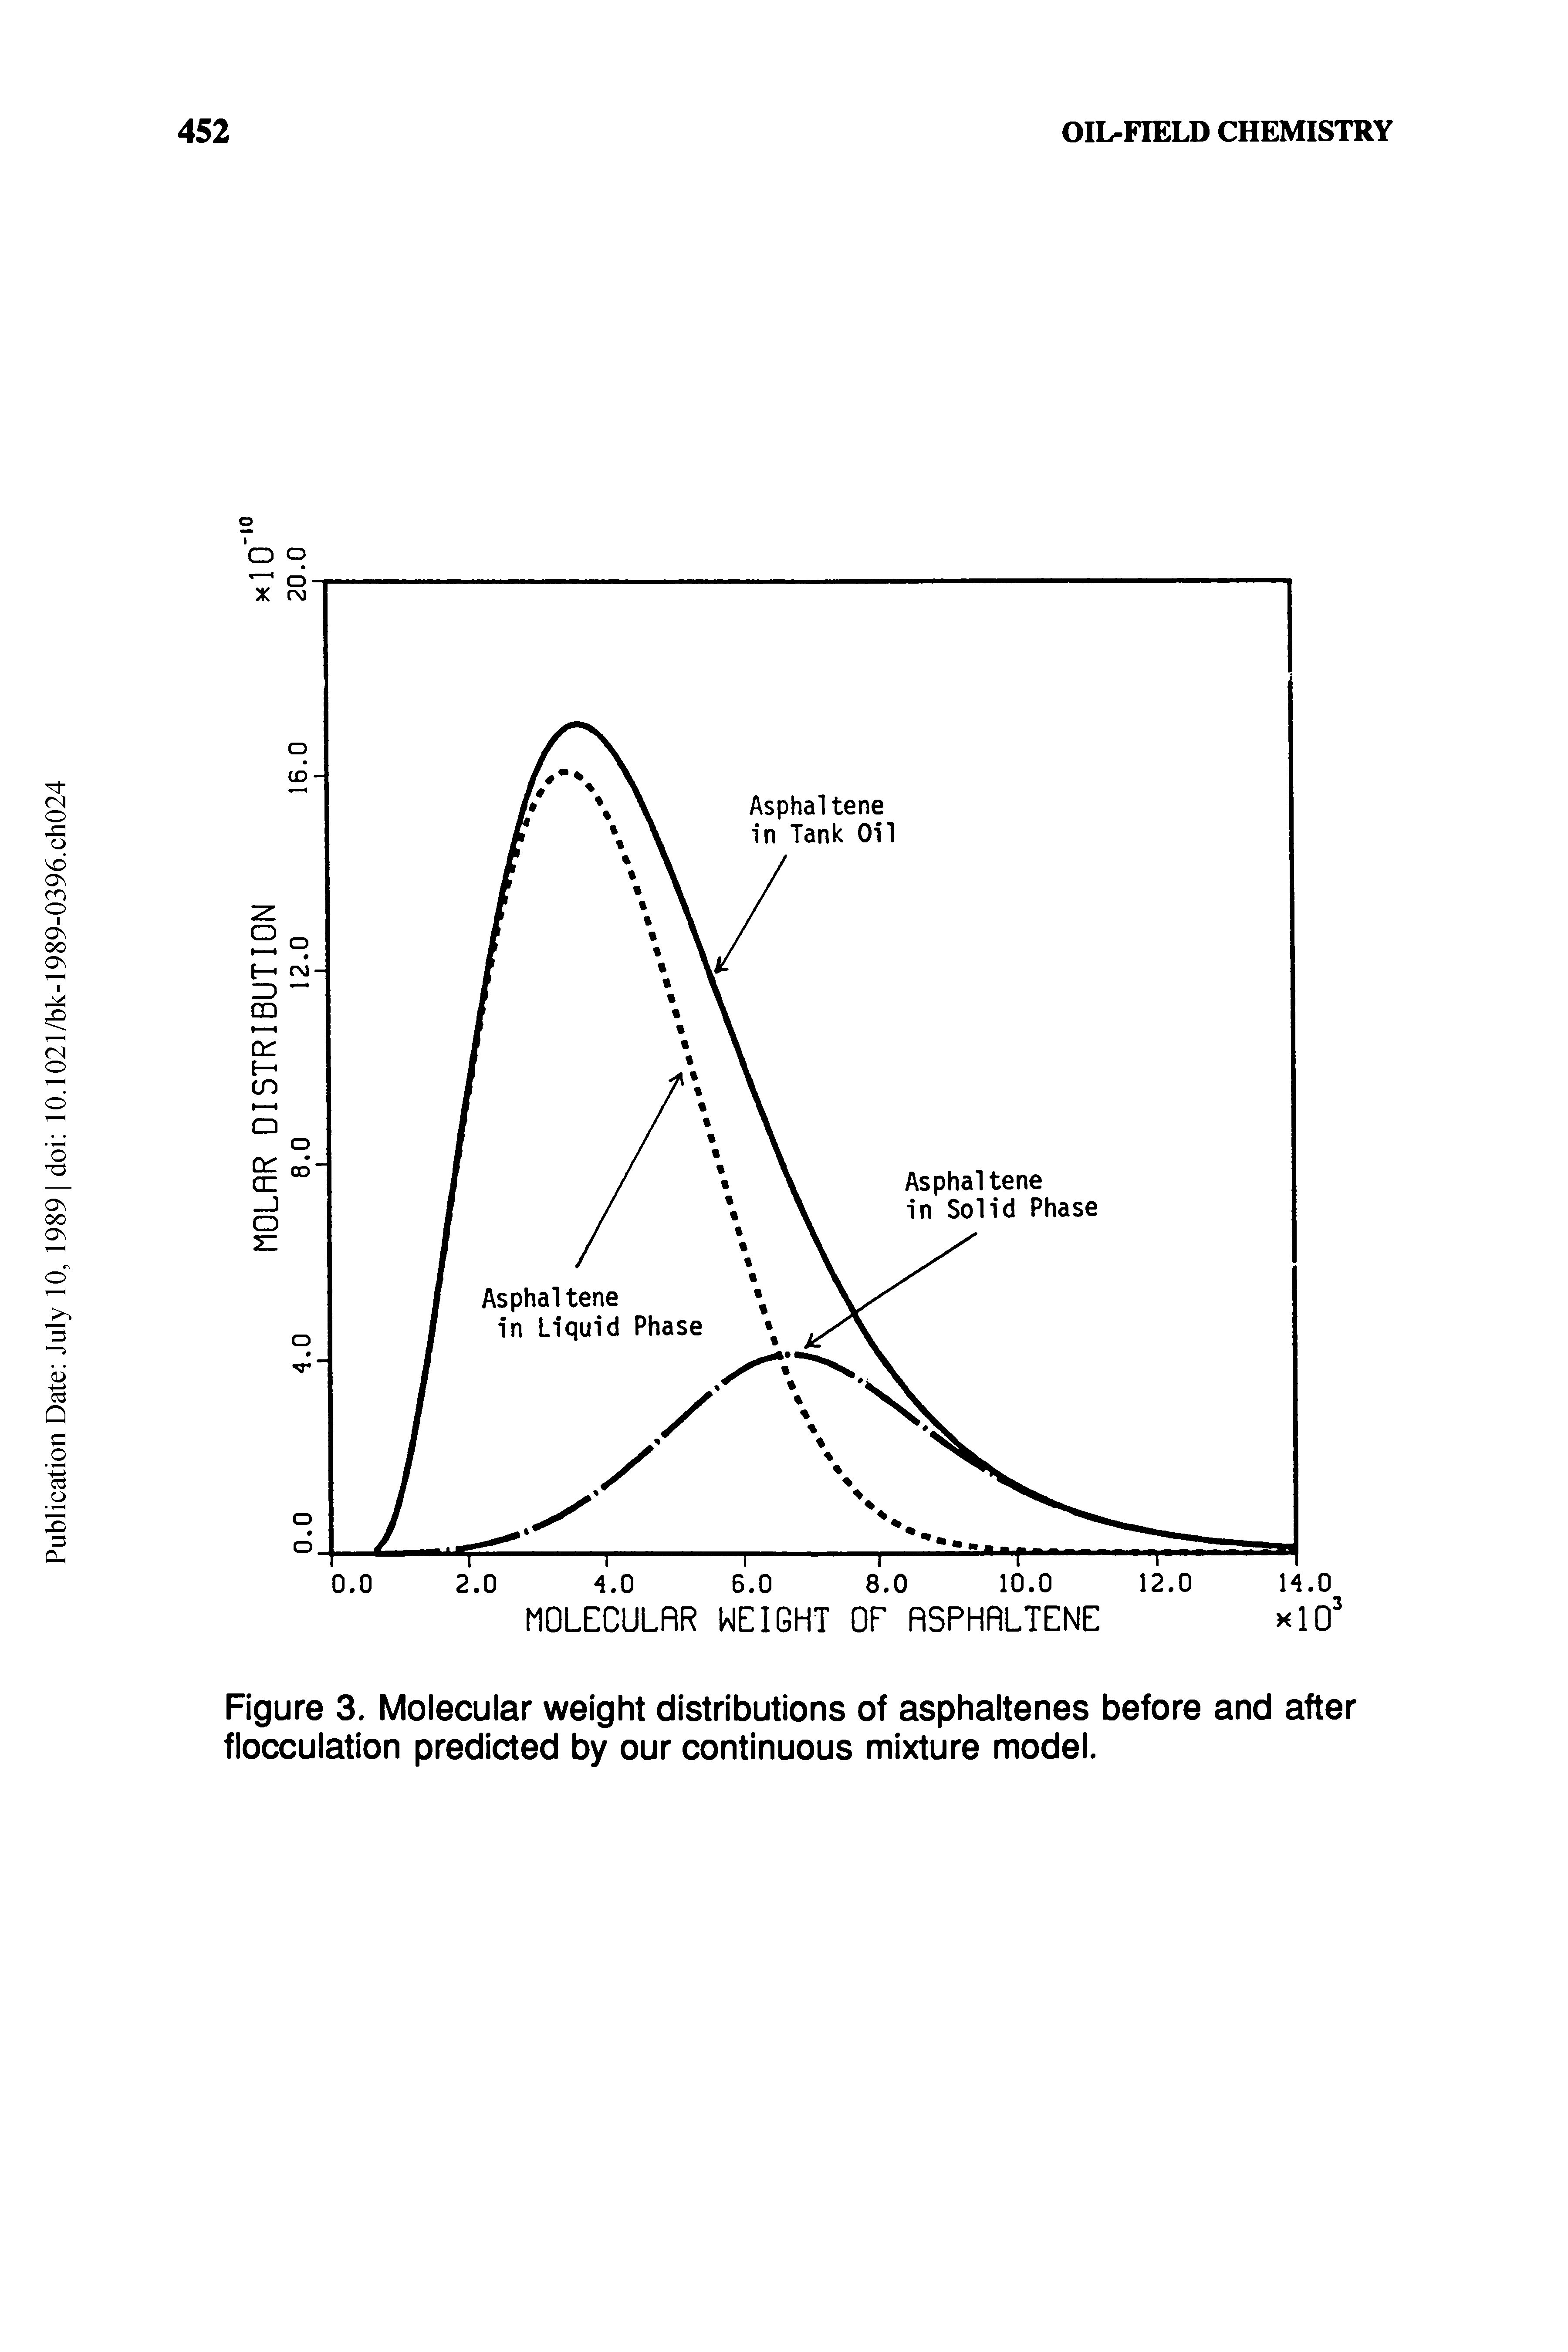 Figure 3. Molecular weight distributions of asphaltenes before and after flocculation predicted by our continuous mixture model.